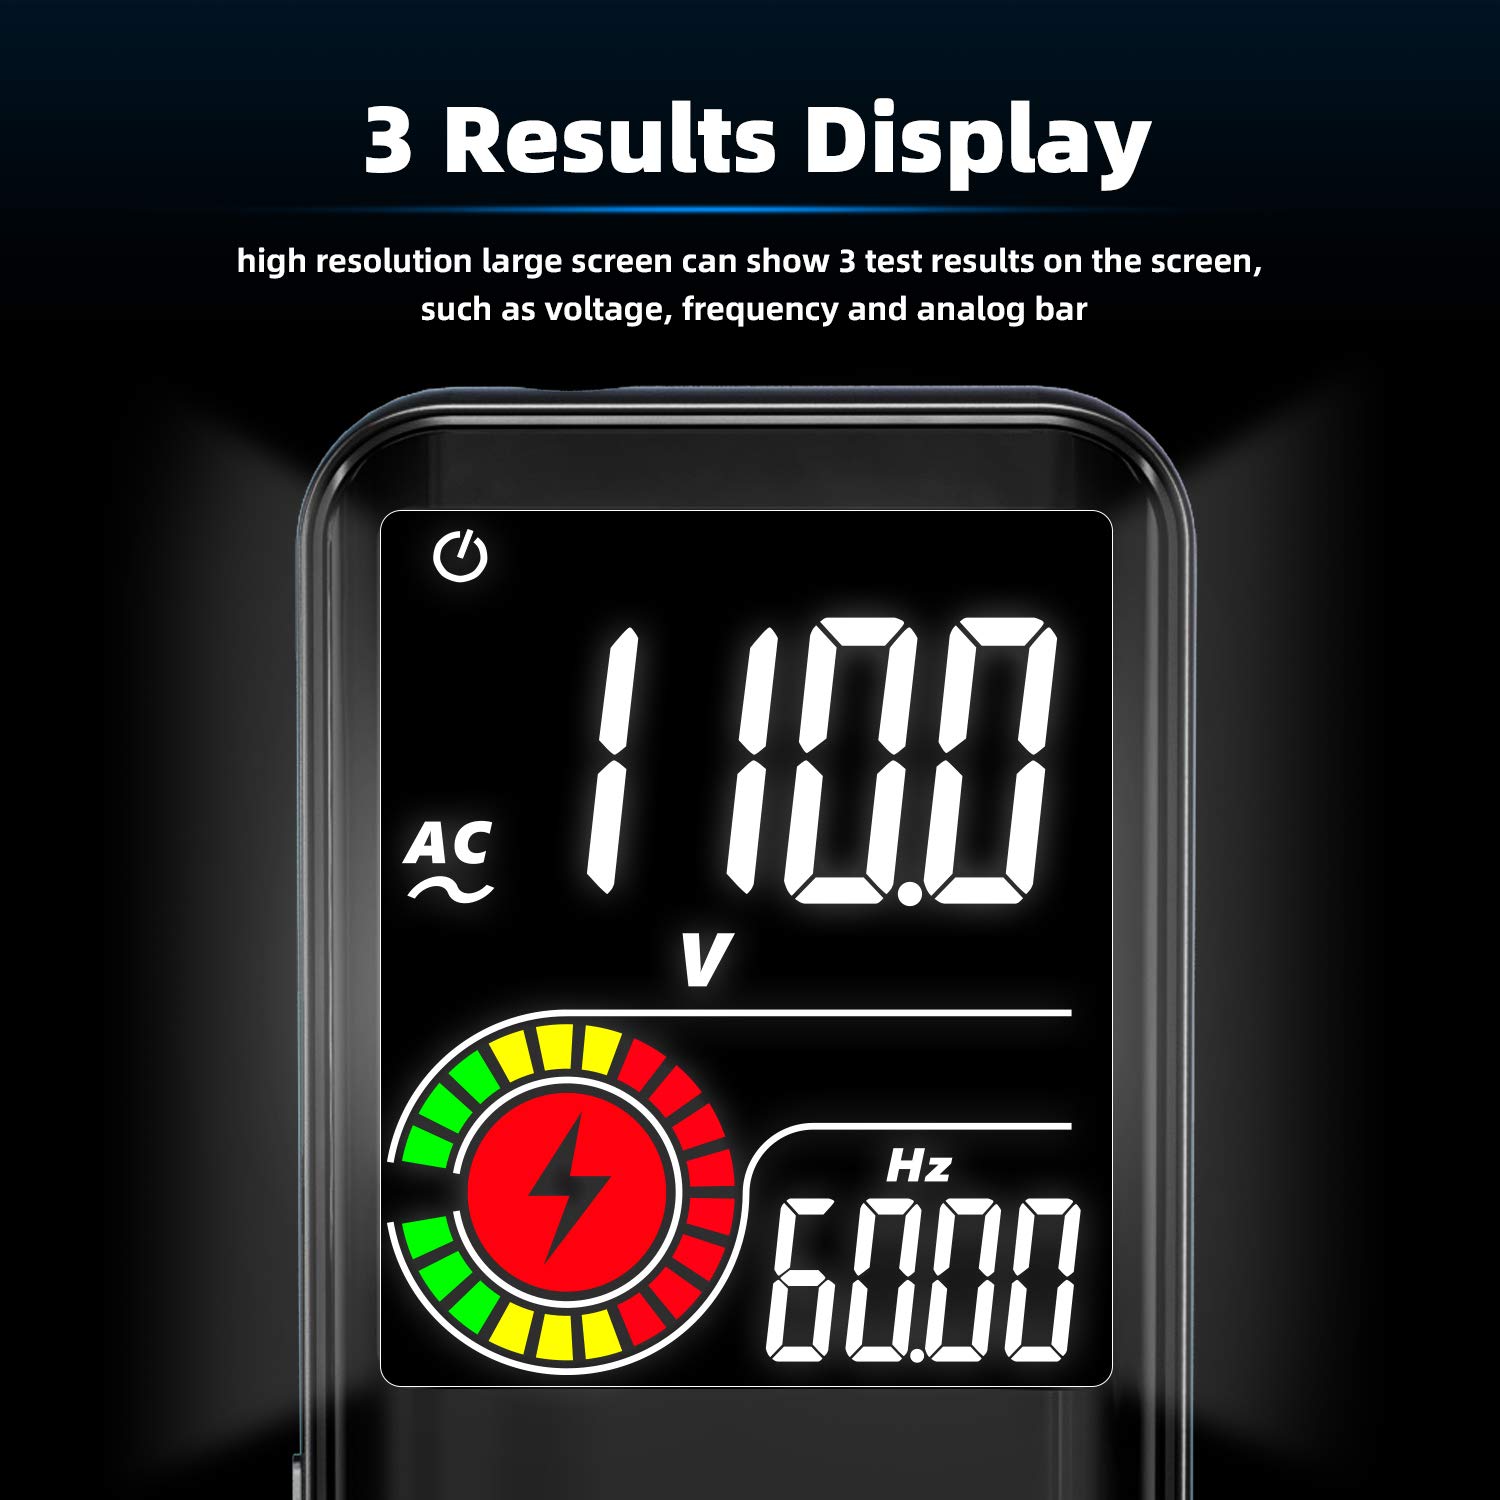 MAXRIENY Digital Multimeter, Color LCD with Smart Mode, 3 Results Display 9999 Counts Auto-Ranging Pocket Voltmeter Capacitance Ohm Continuity Frequency Diode Duty Cycle Live Check Voltage Tester